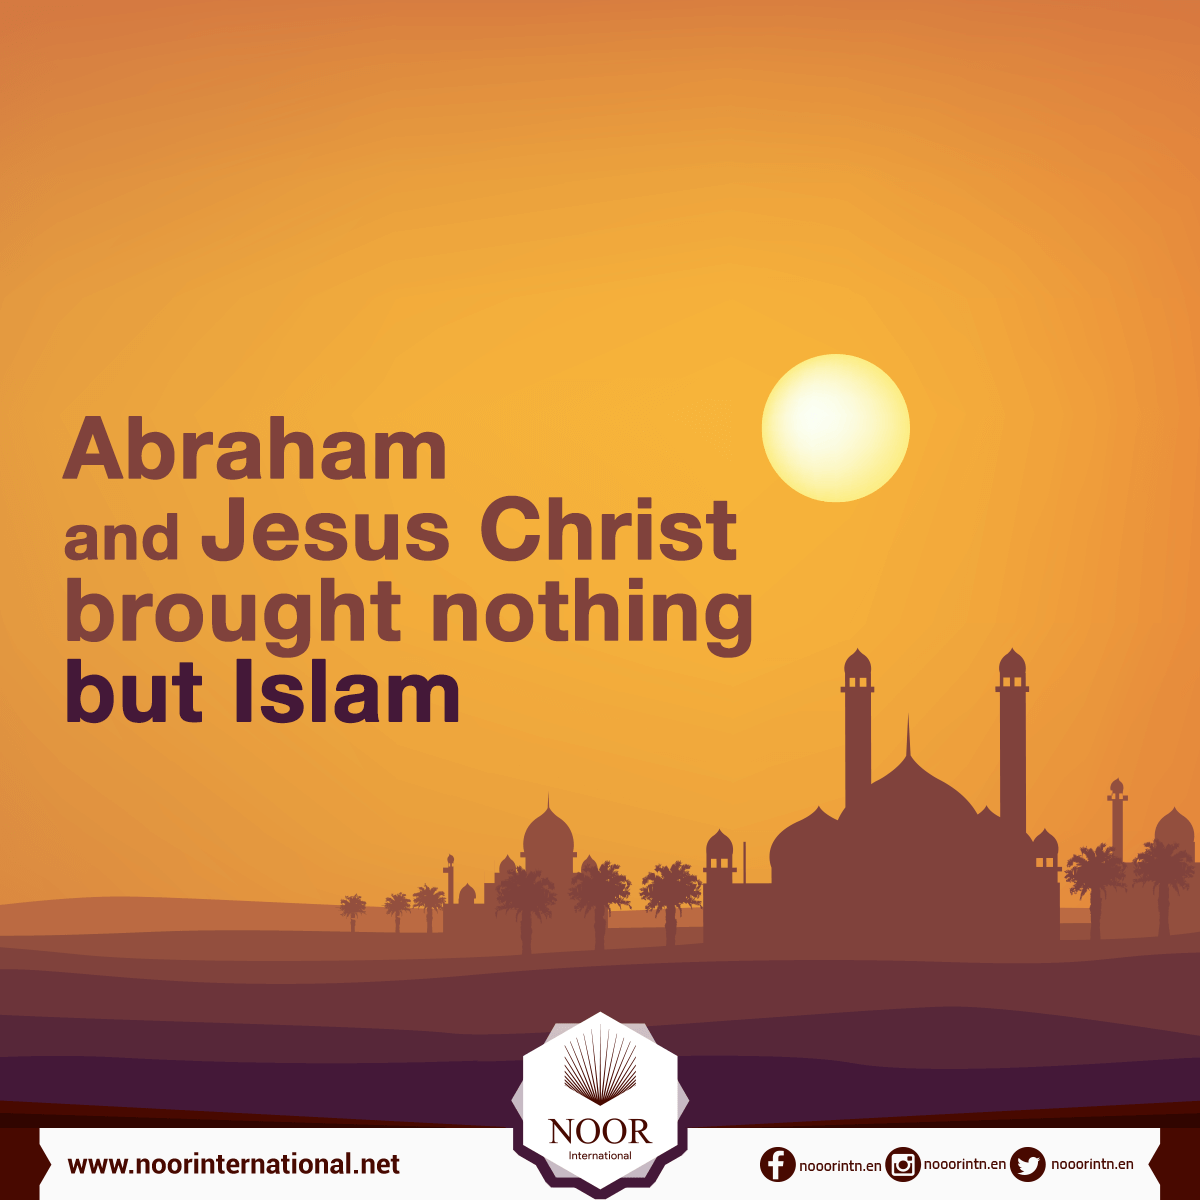 Abraham and Jesus Christ brought nothing but Islam